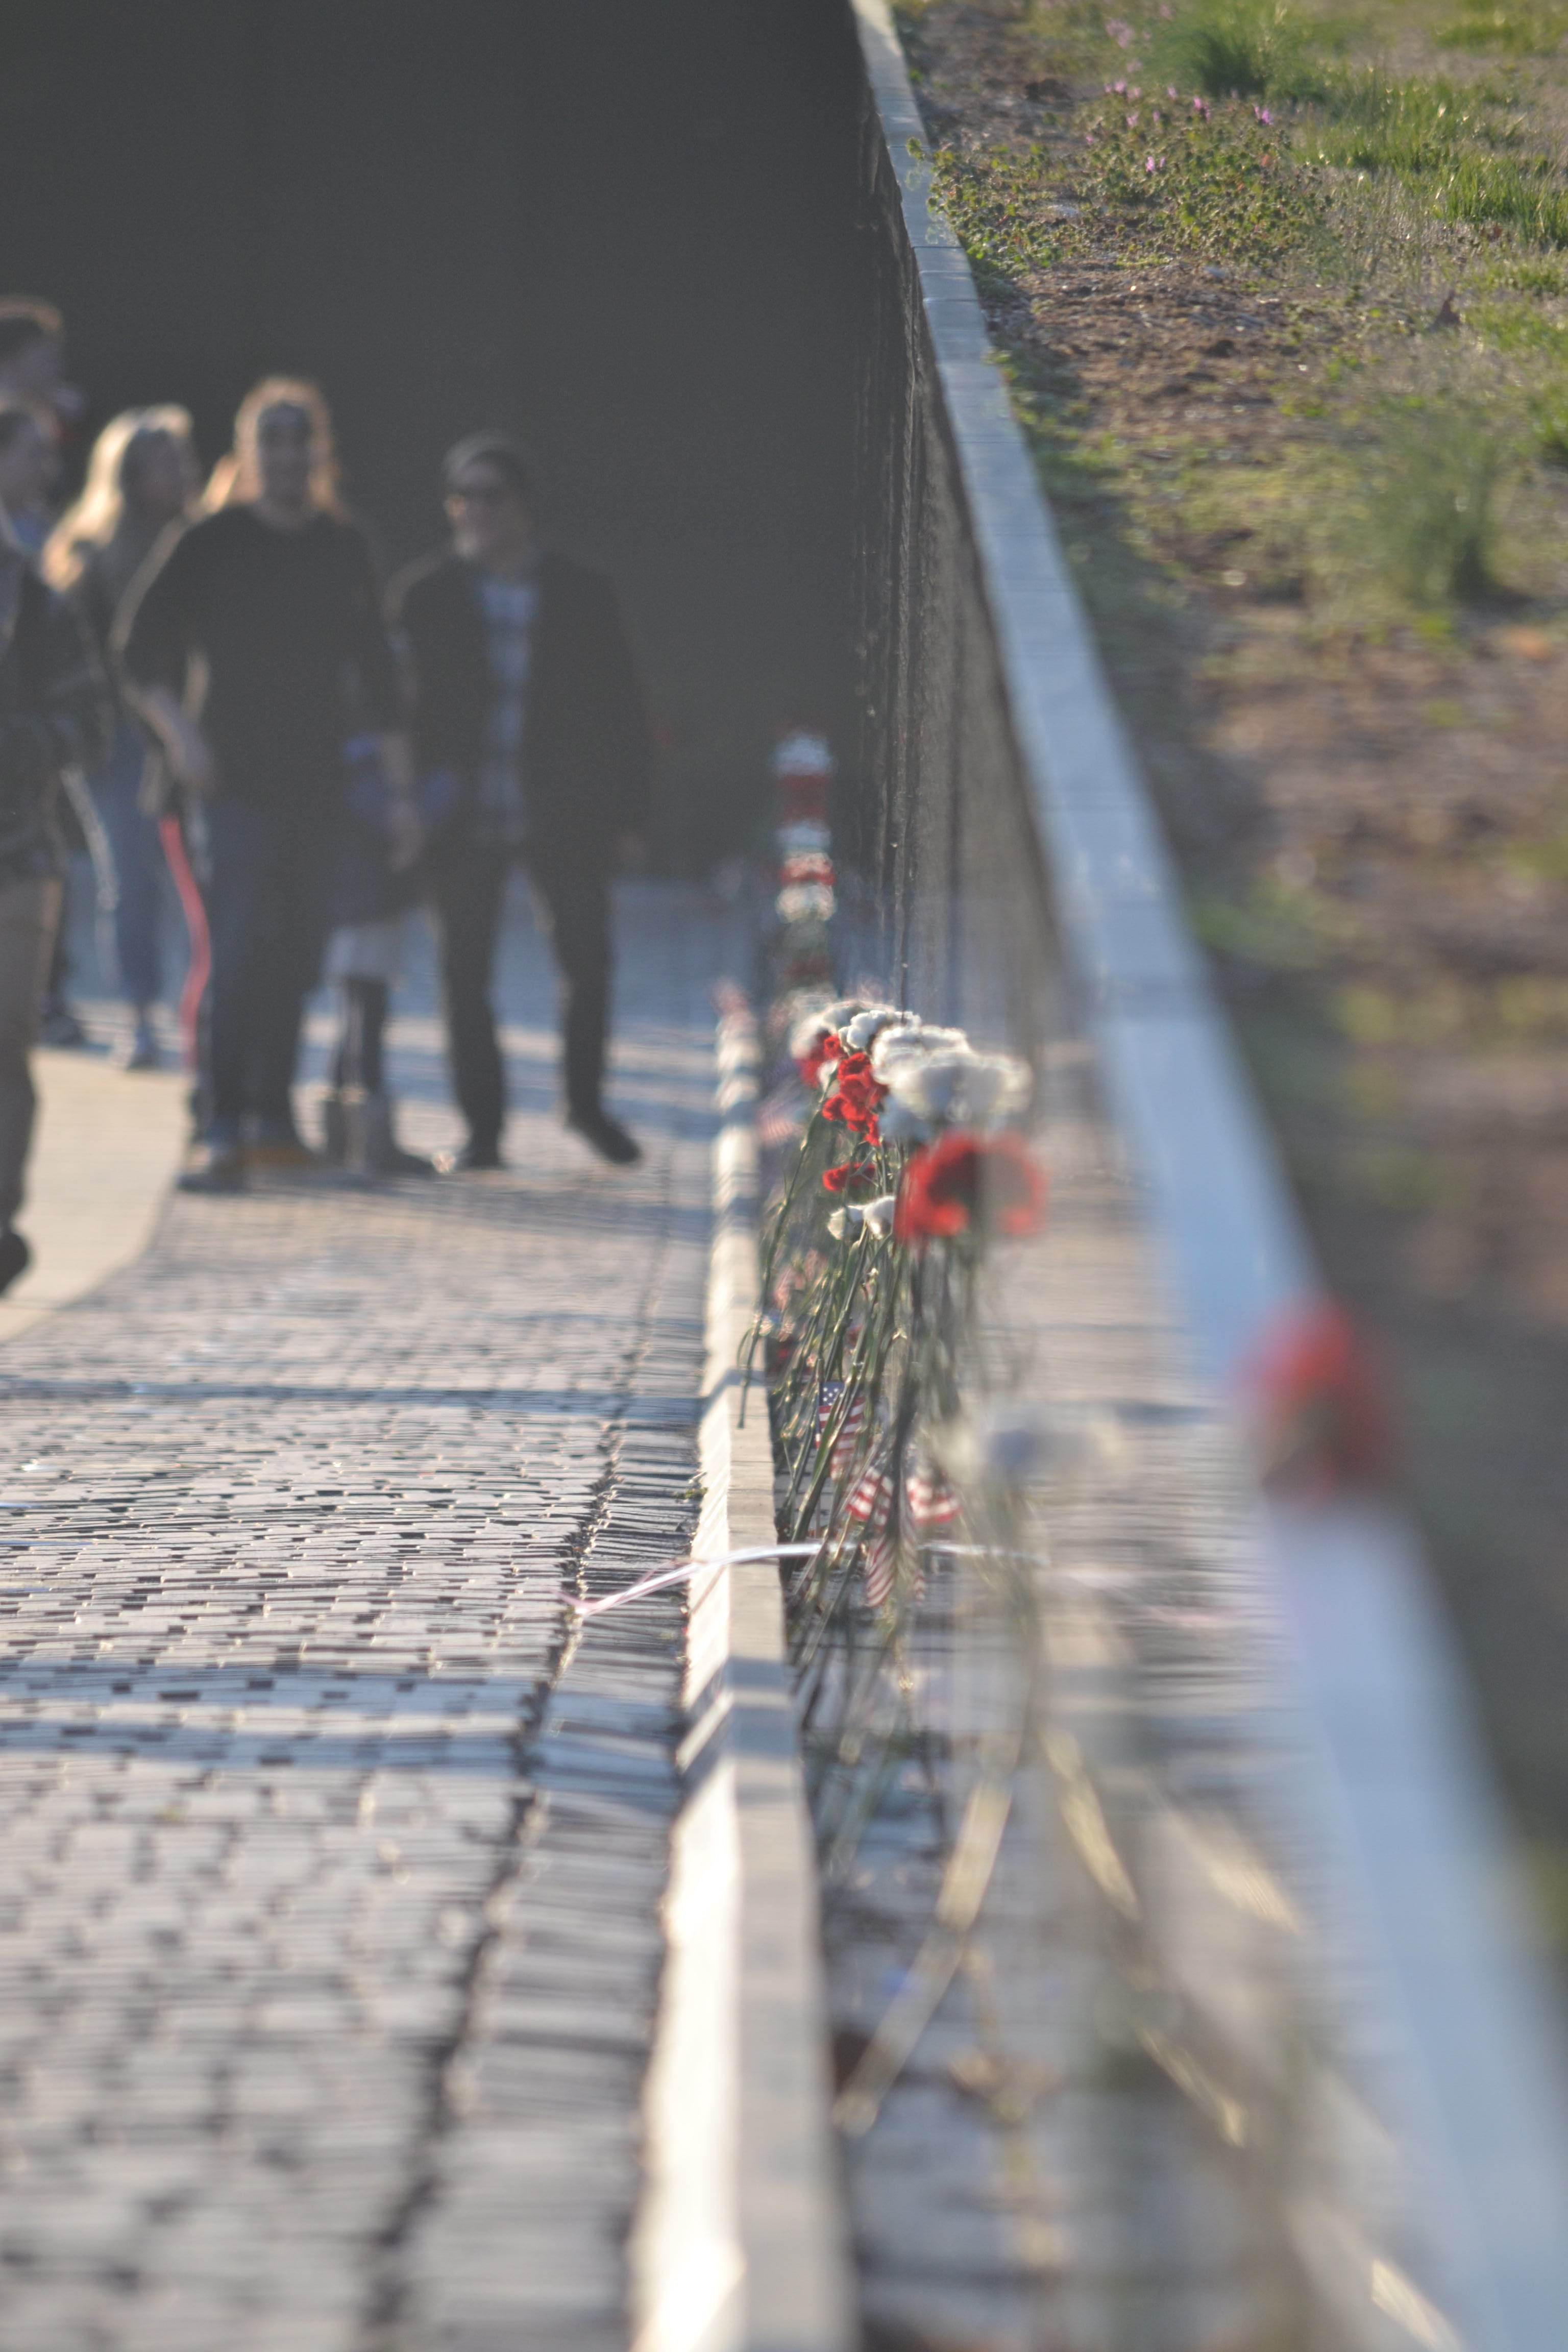 A stone walkway descends parallel to a black mirrored wall with red and white flowers and small flags leant against it.